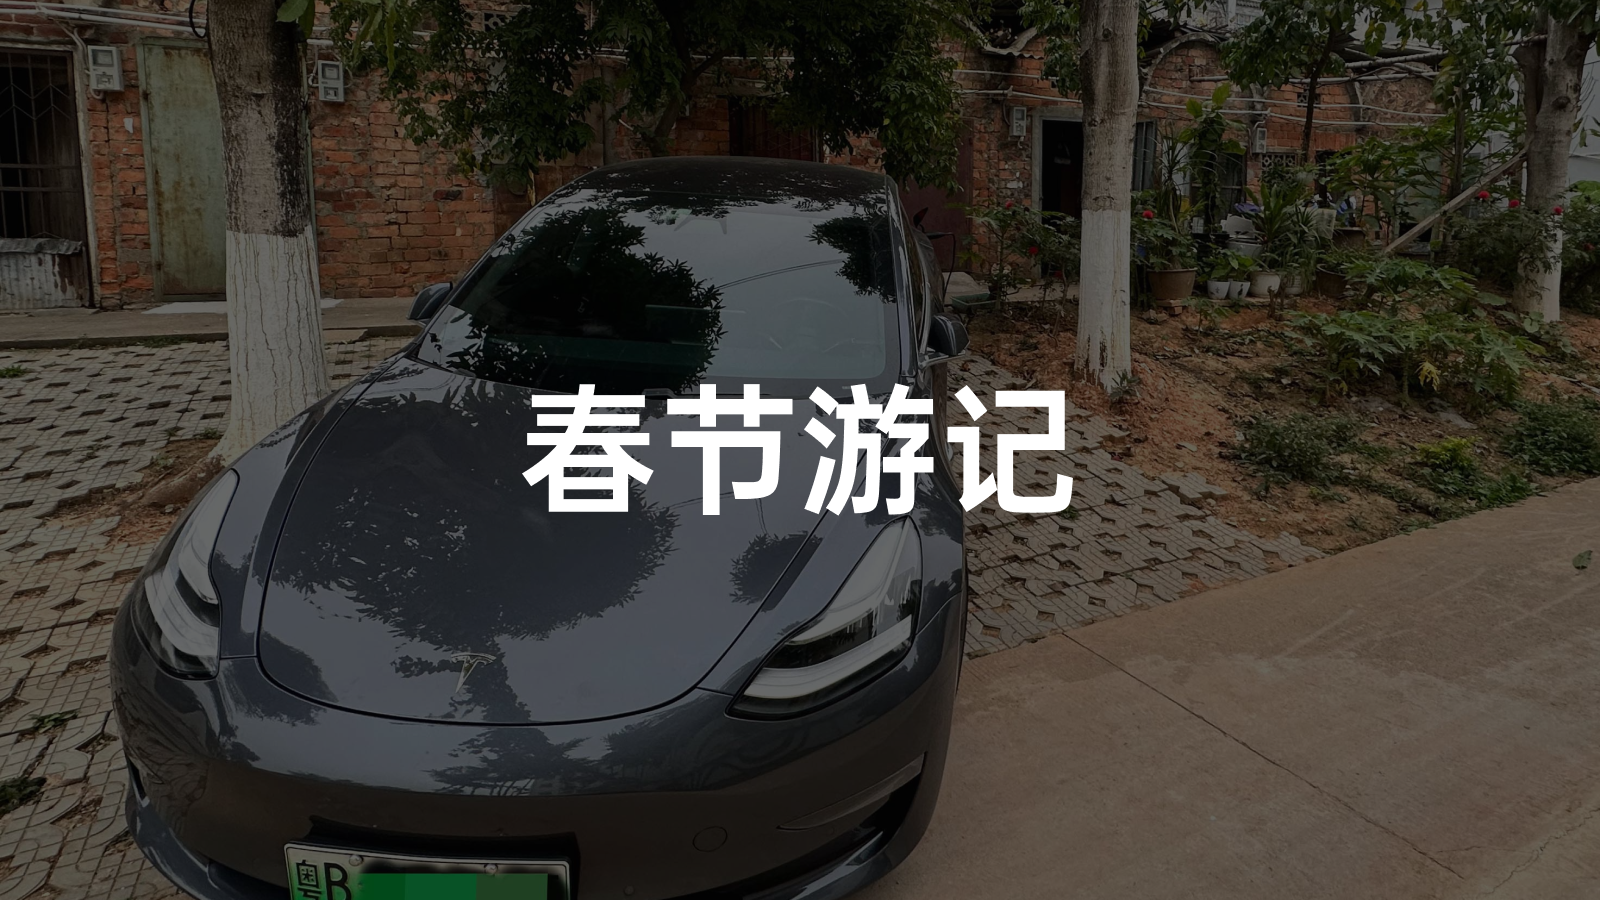 How important are self-built energy supplement systems and assisted driving for self-driving during the Spring Festival?